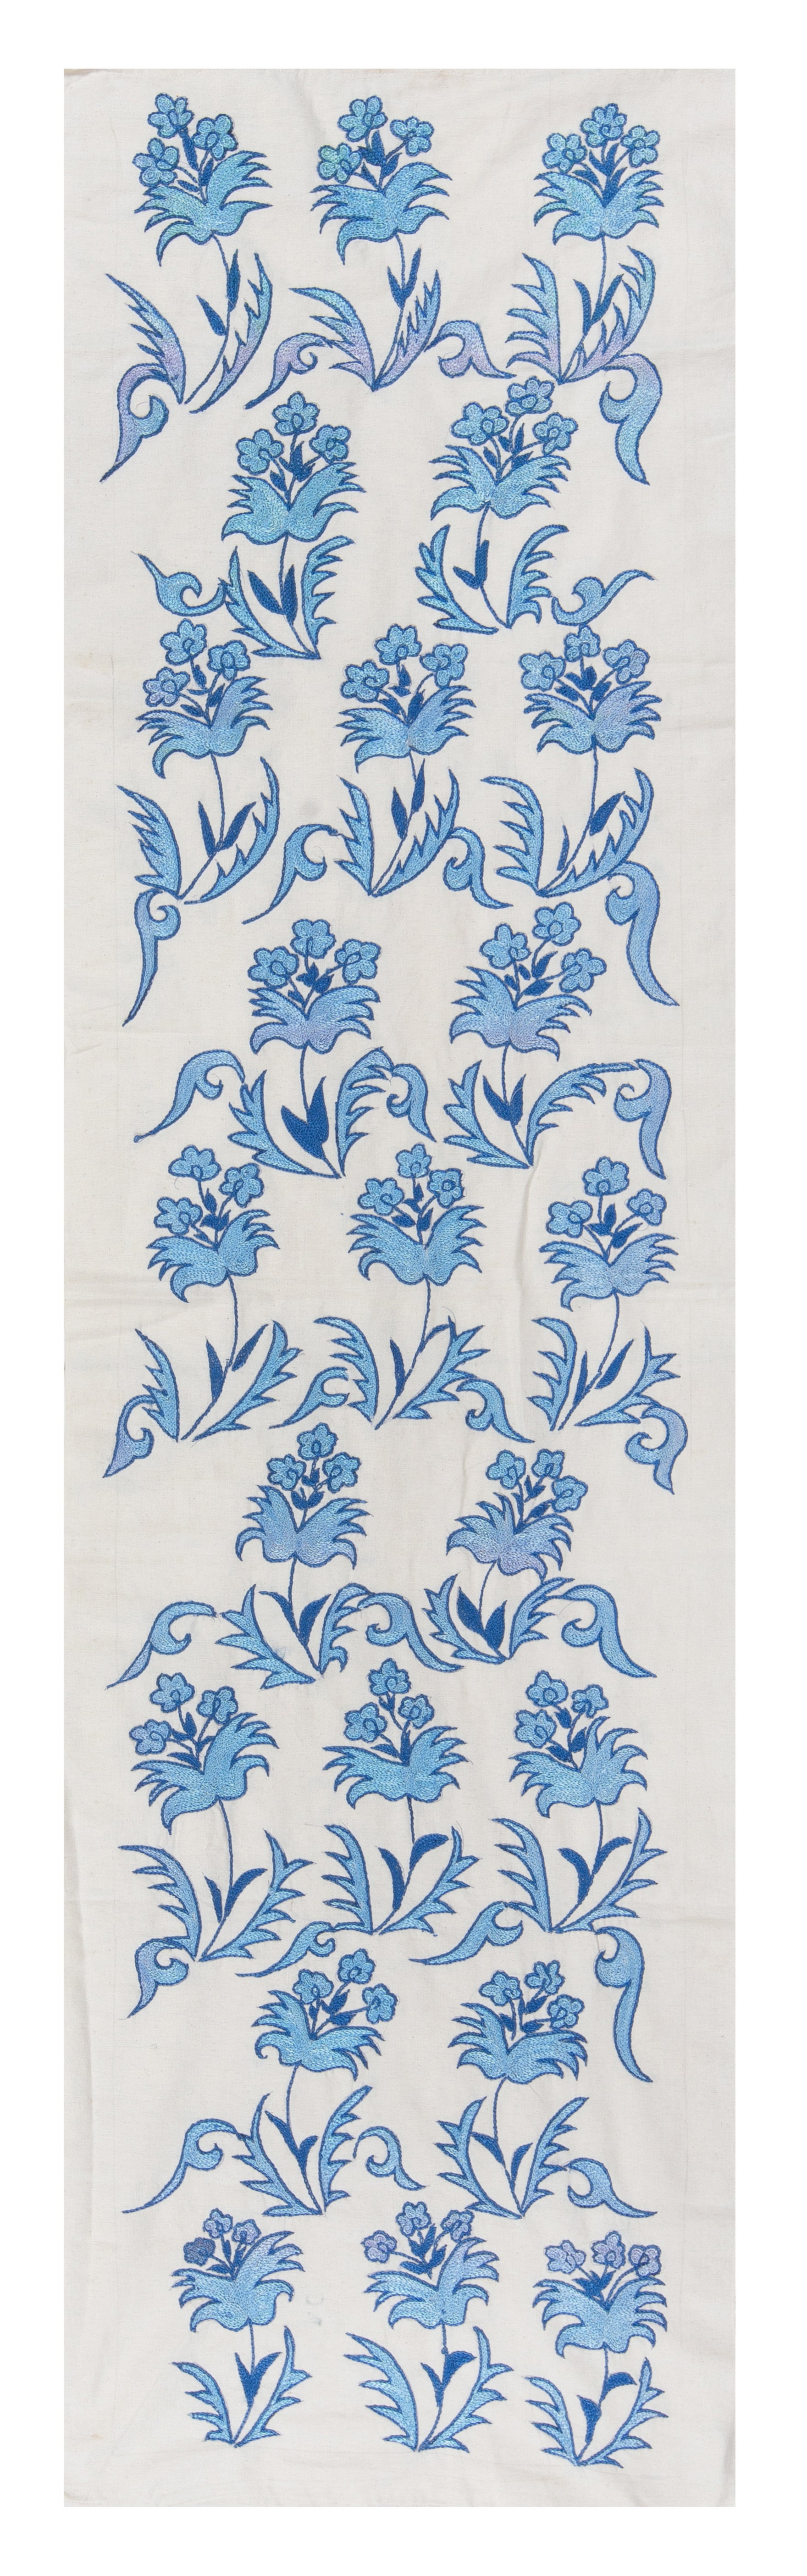 1.7x6.3 Ft Floral Suzani Table Runner, Embroidered Cotton & Silk Wall Hanging